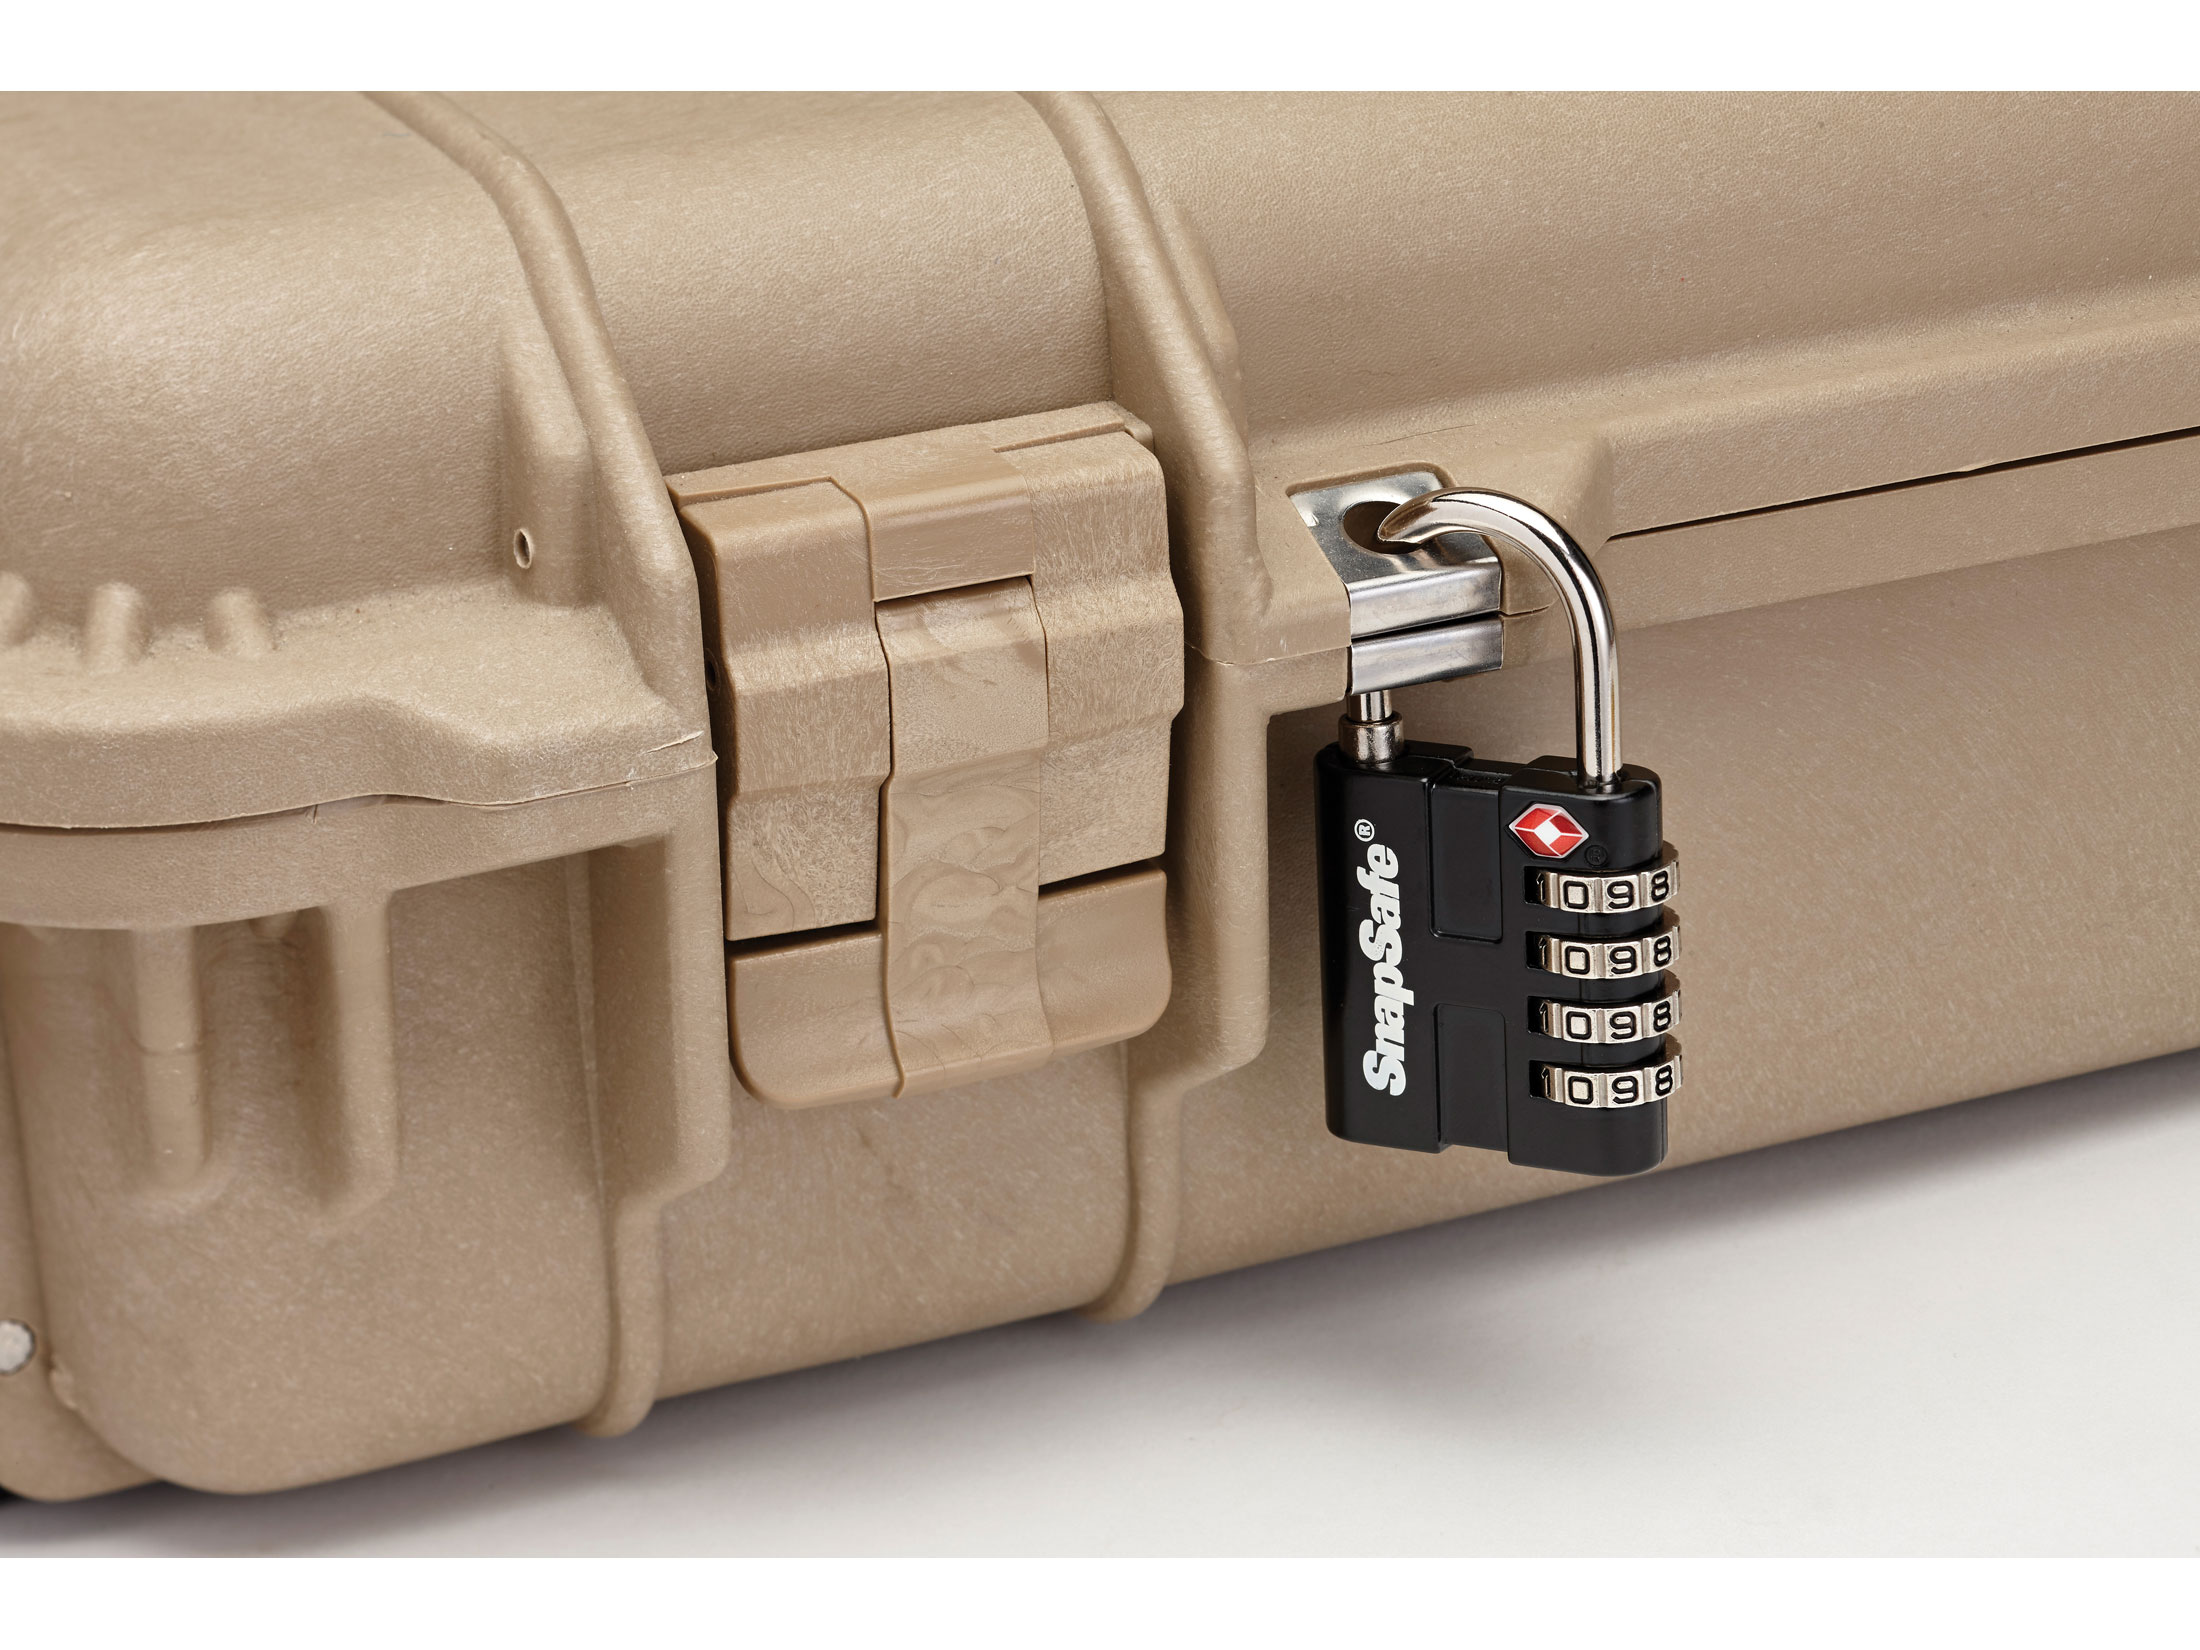 SnapSafe TSA Approved Combination Lock Package of 2 For Sale